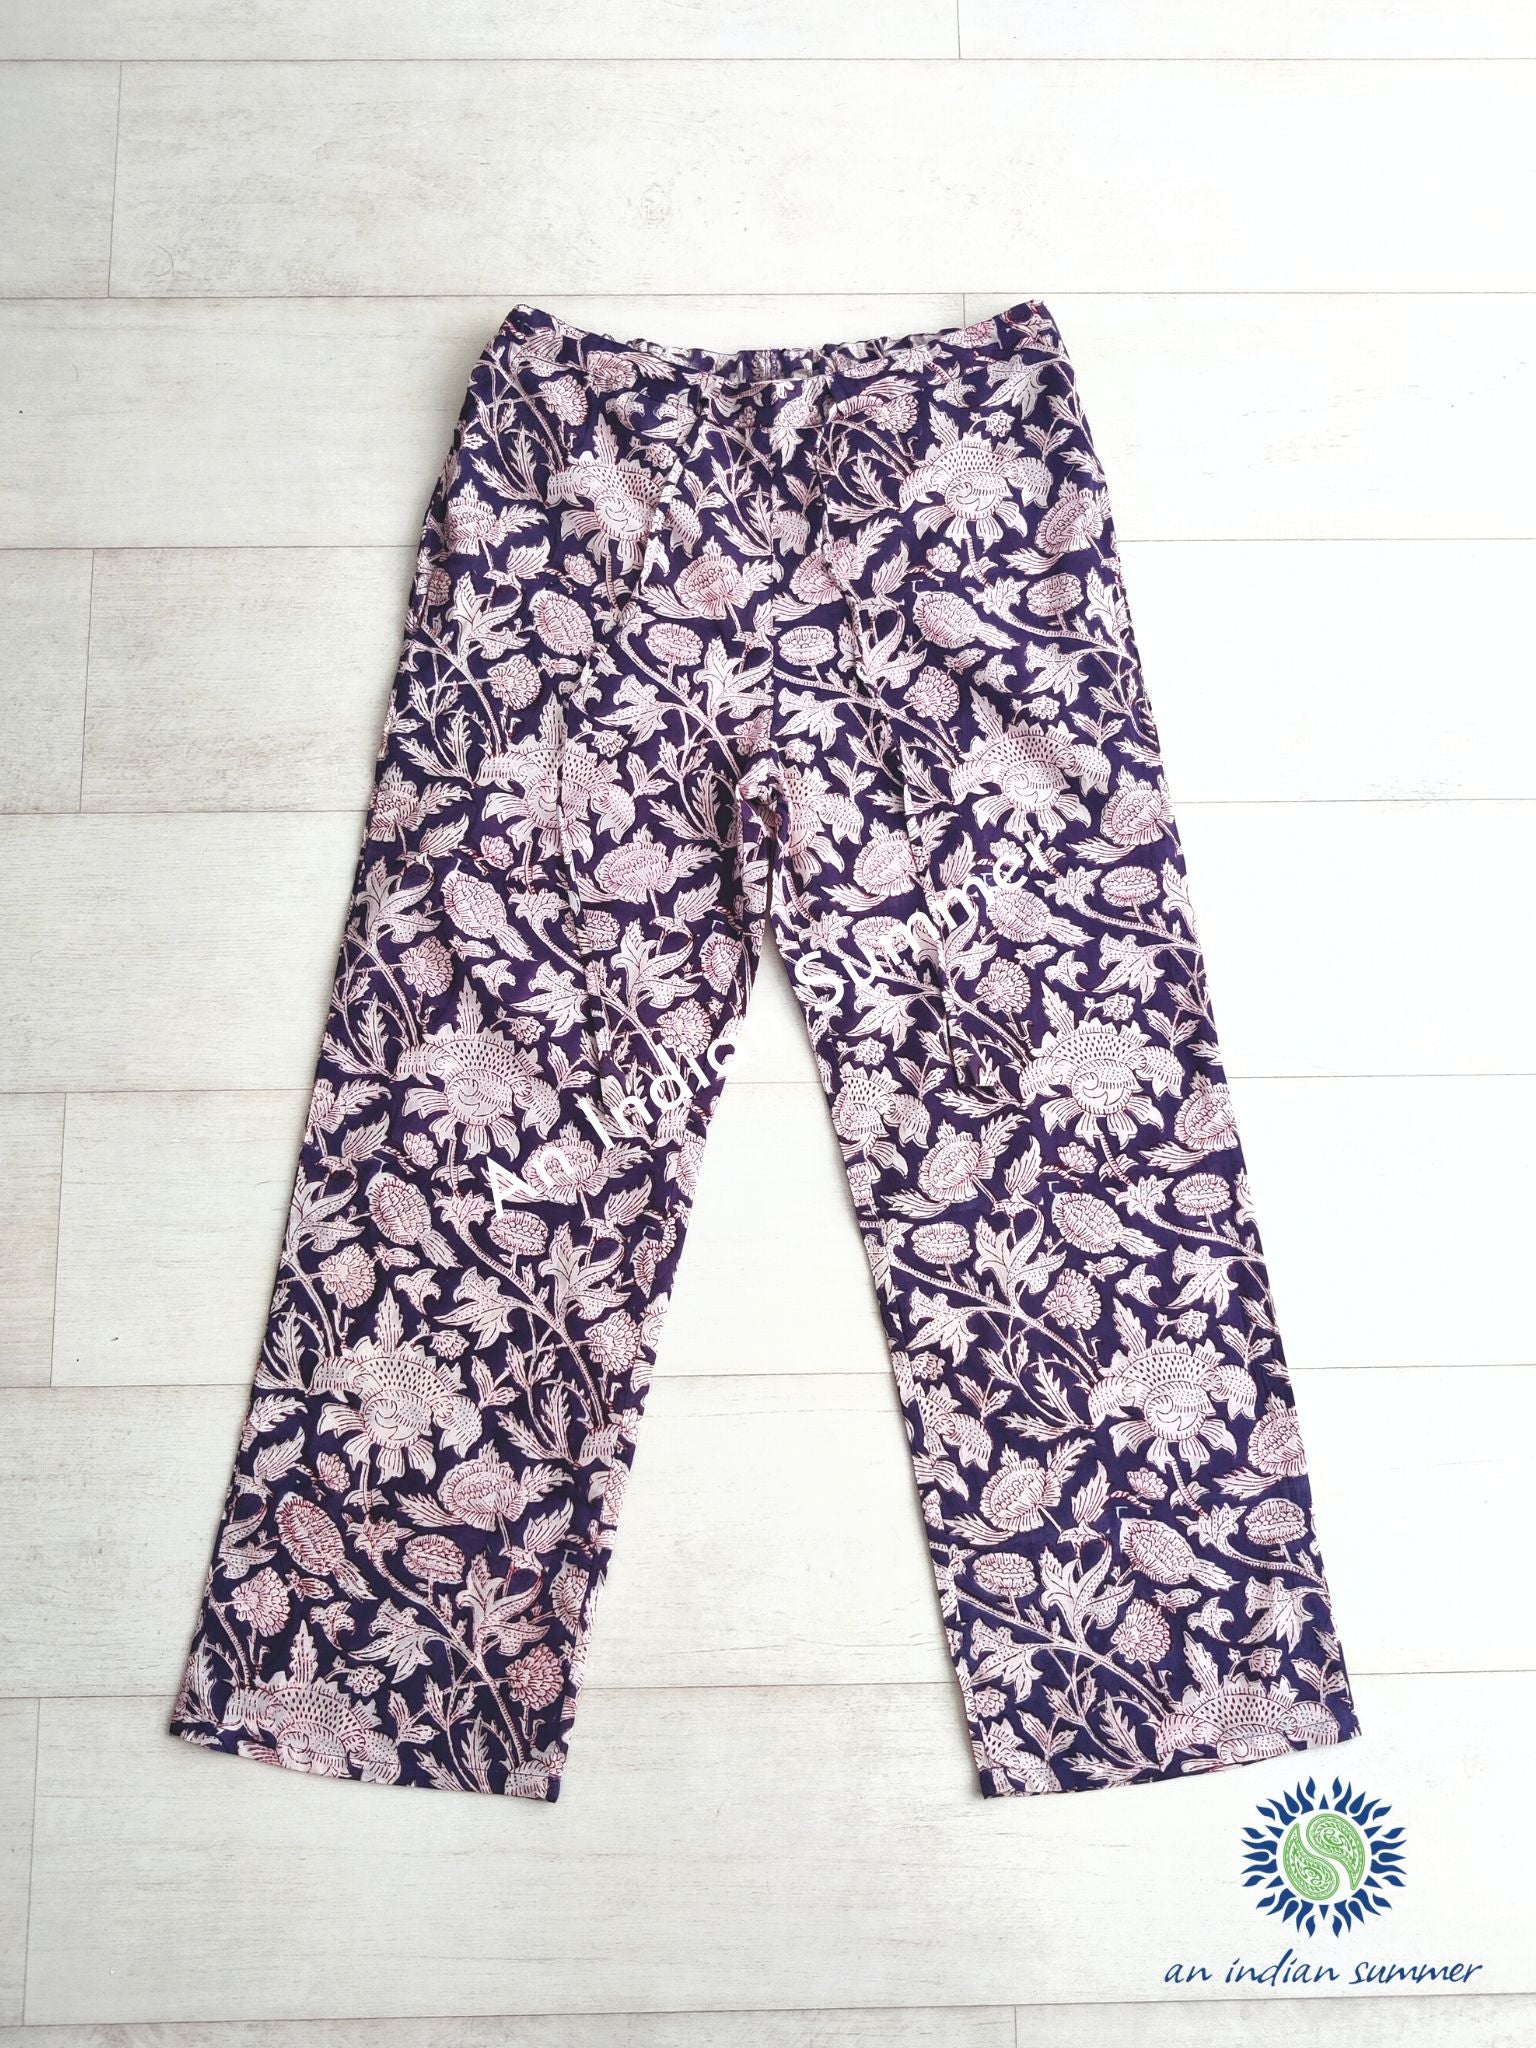 Cotton Trousers | Thistle | French Navy | Botanical Block Print | Hand Block Printed | Cotton Voile | An Indian Summer | Seasonless Timeless Sustainable Ethical Authentic Artisan Conscious Clothing Lifestyle Brand